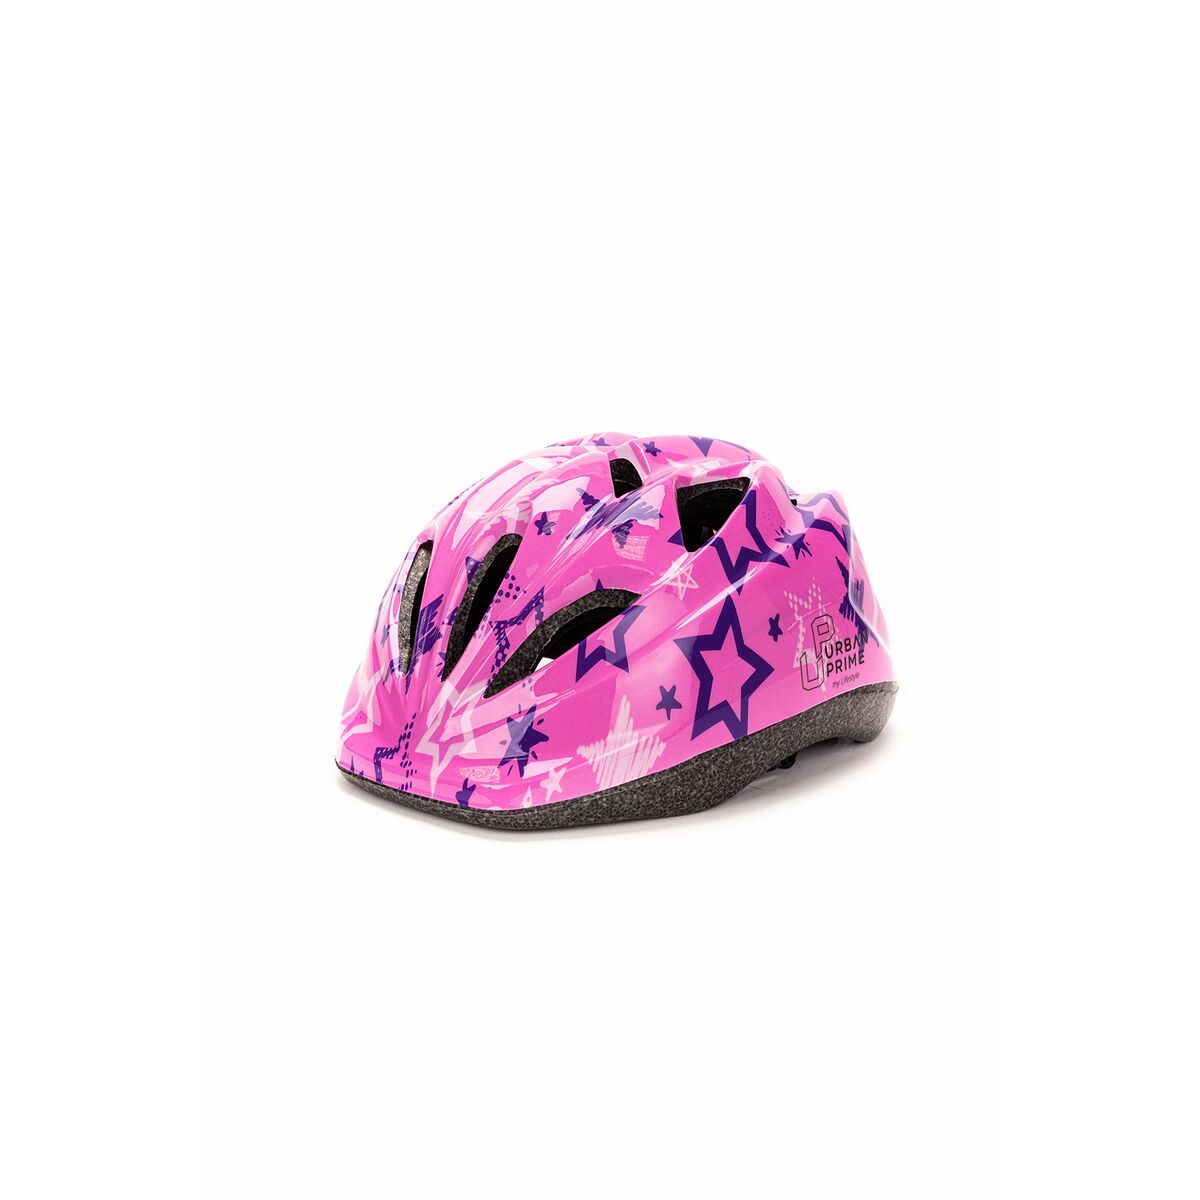 Children's Cycling Helmet Urban Prime UP-HLM-KID/P Pink One size